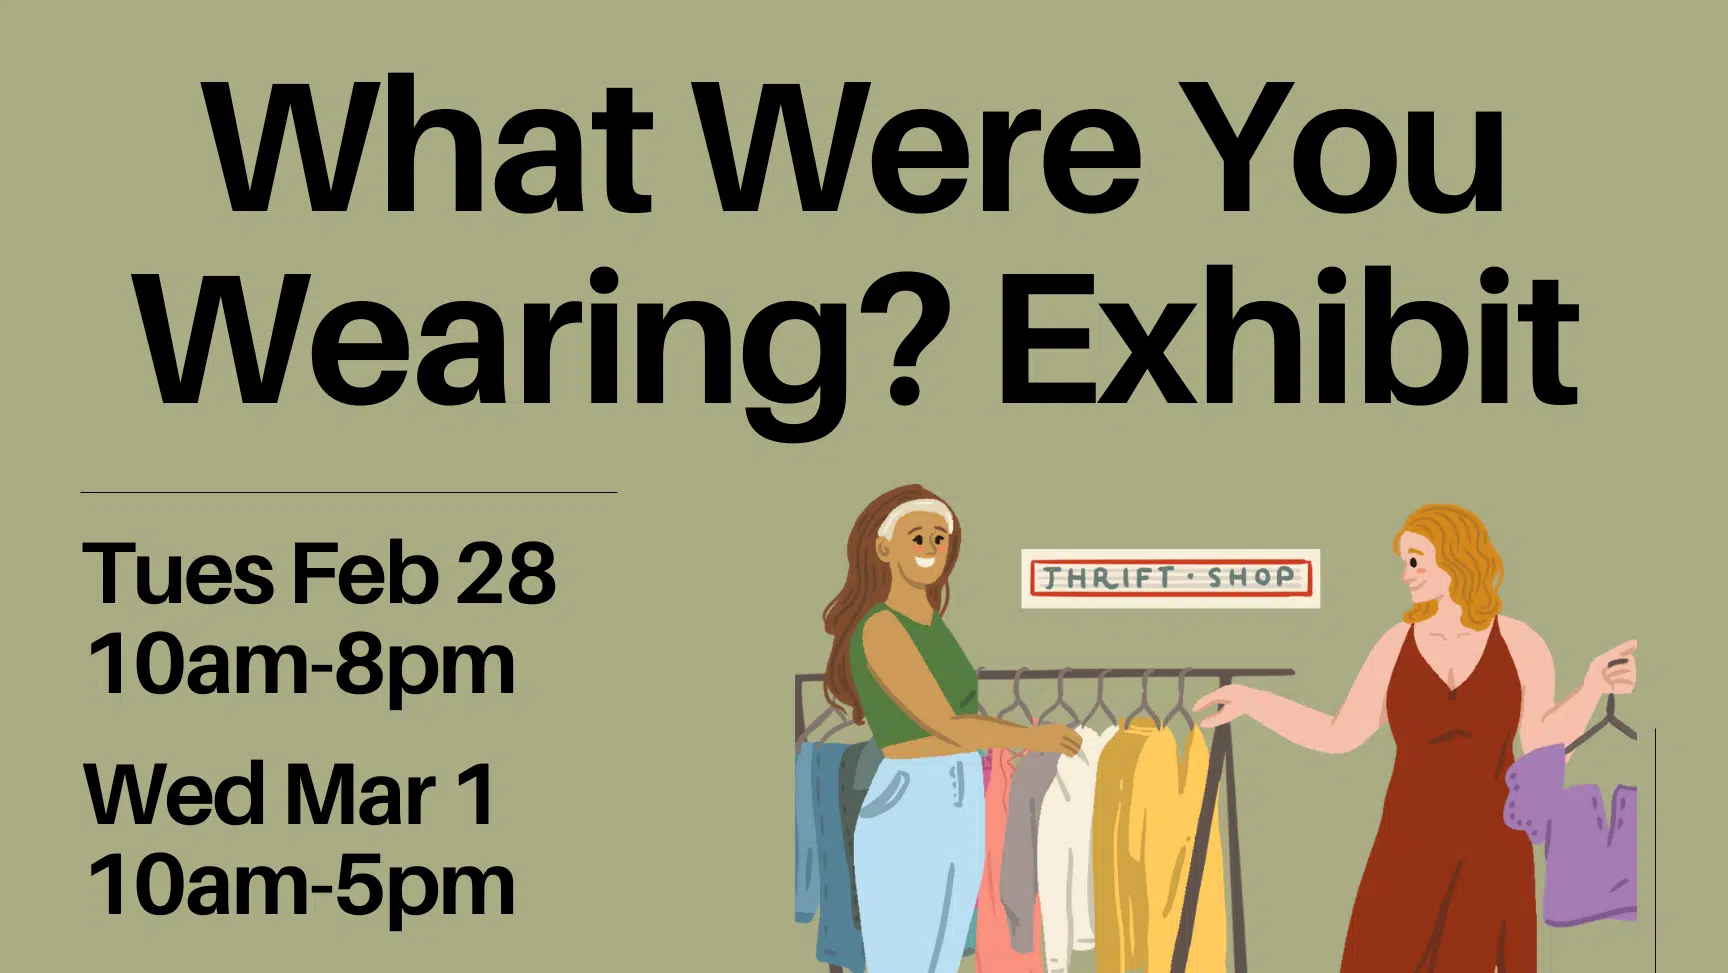 What were you wearing? exhibit. From tuesday feb 28, 10am to 8pm. And wednesday march 1 from 10am to 5pm. Event is in the SLC MPR